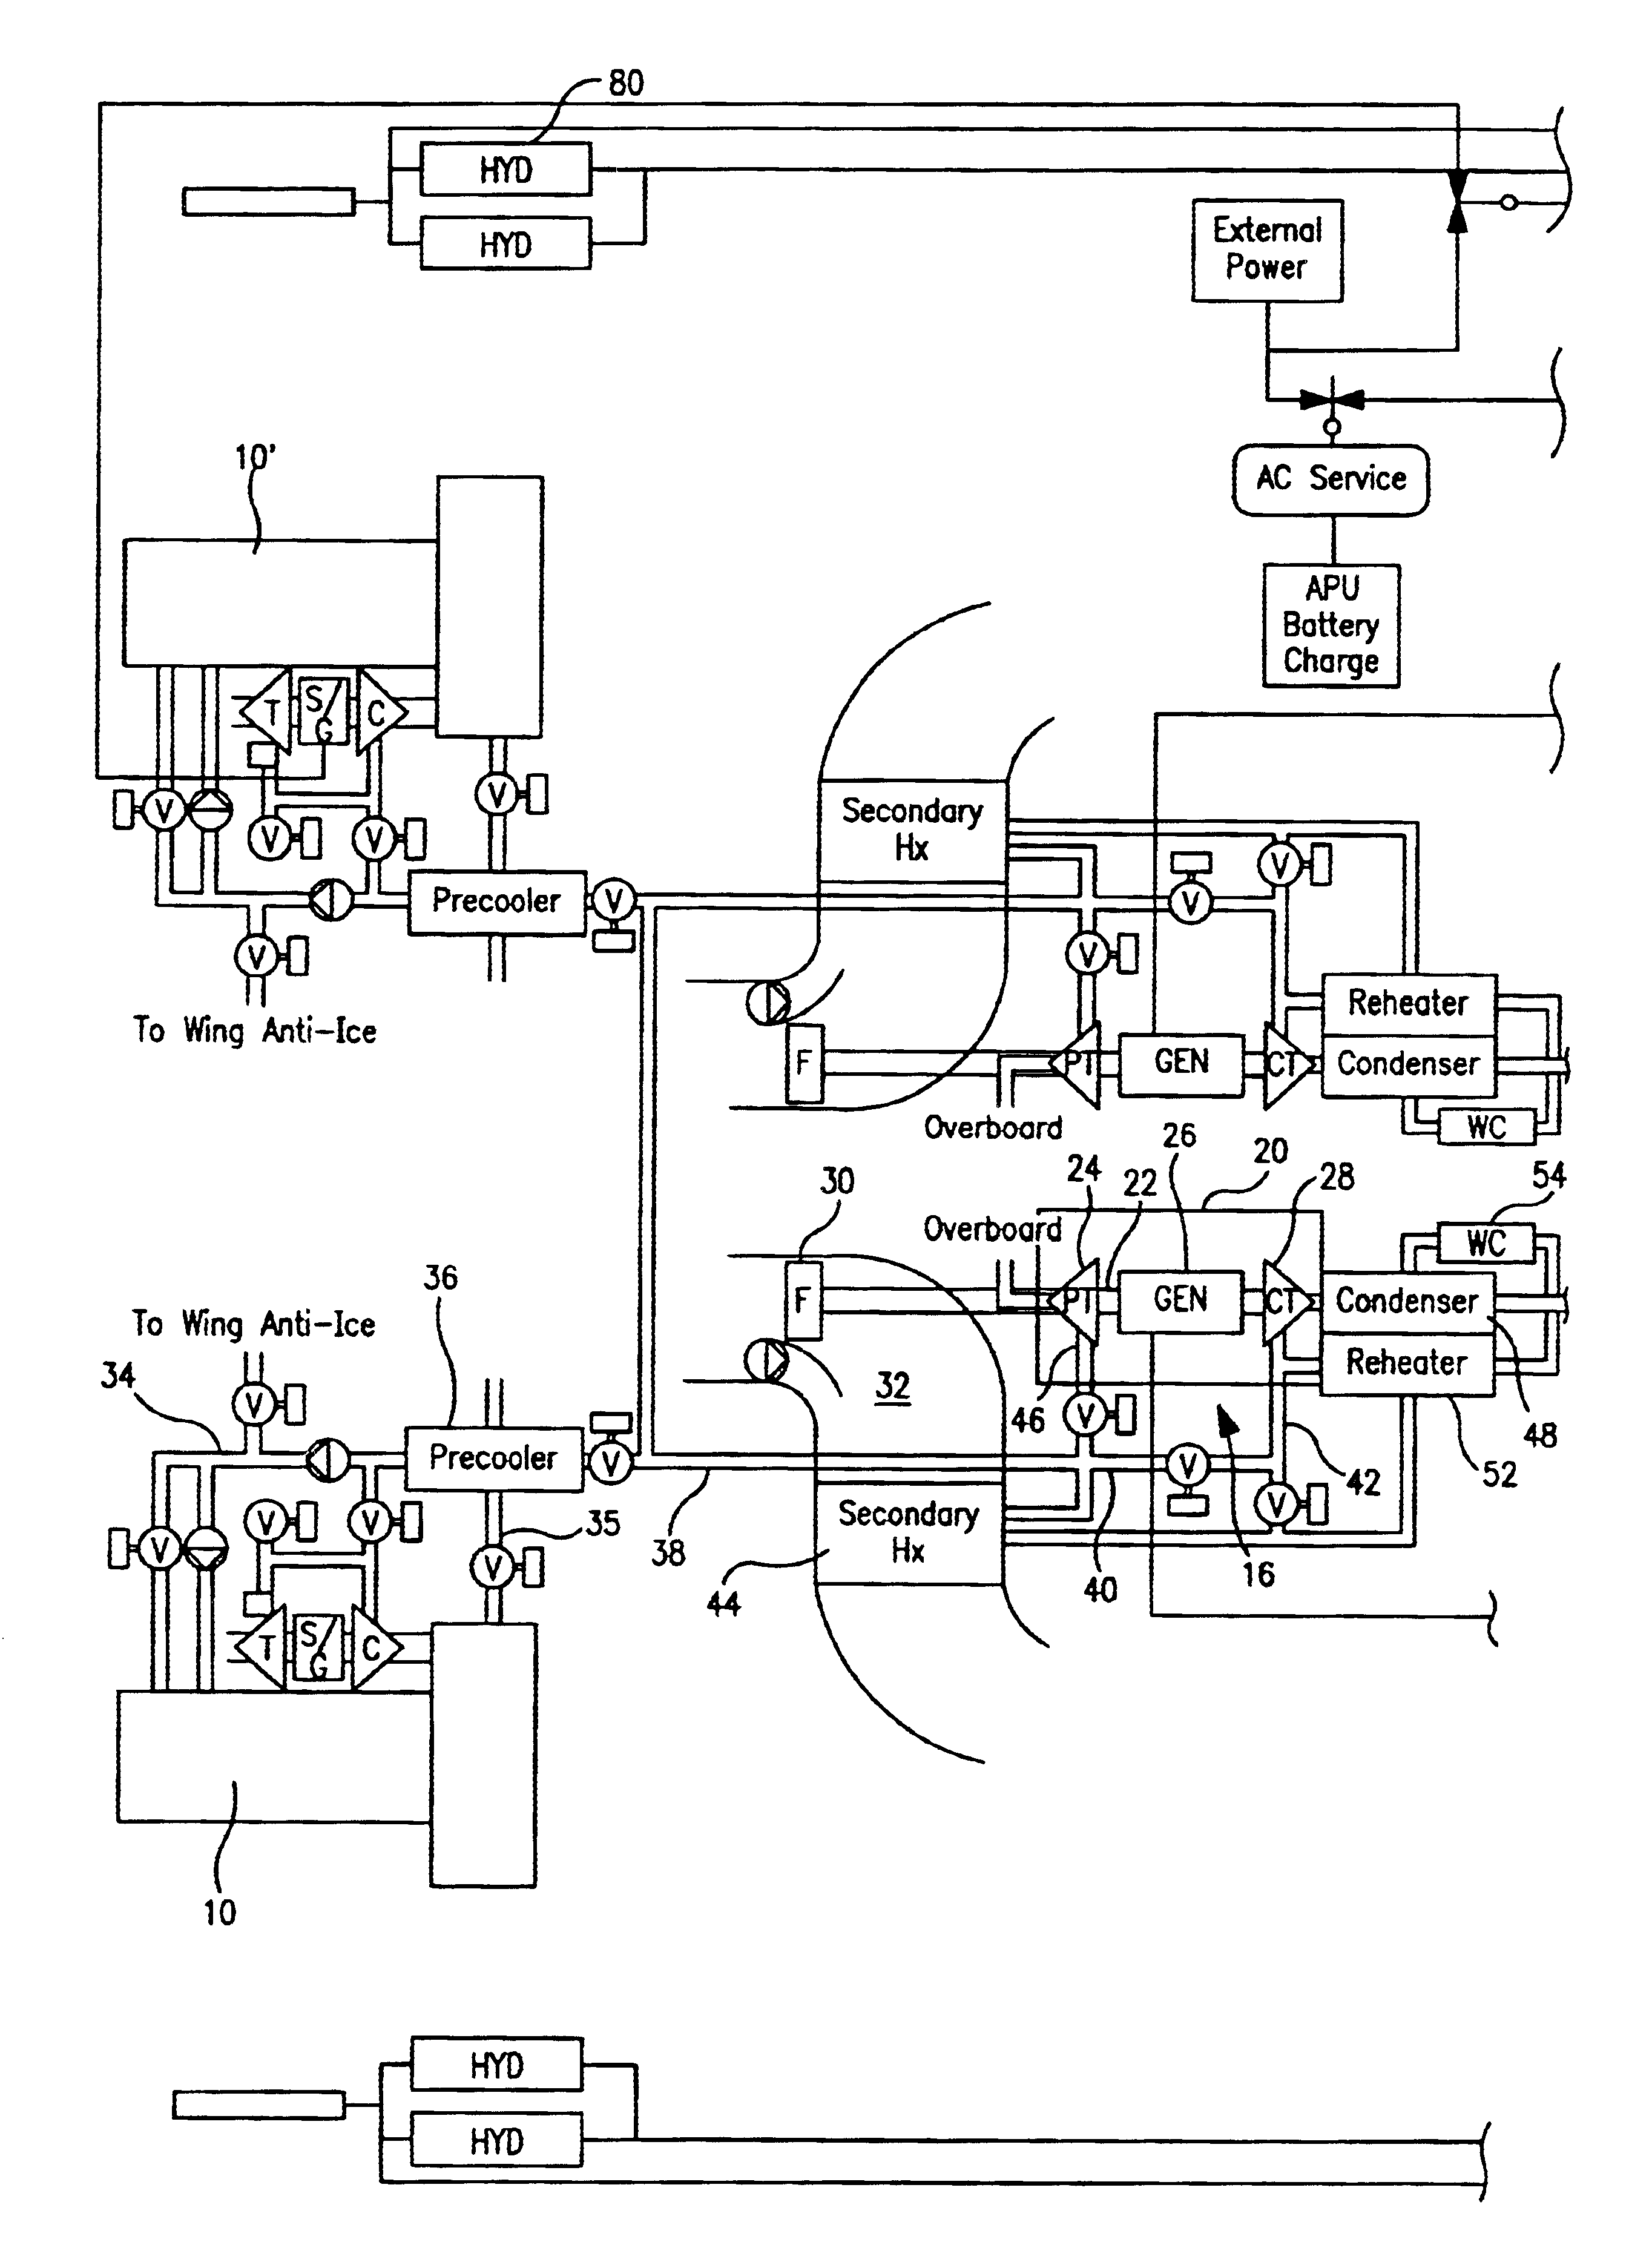 Electric power and cooling system for an aircraft